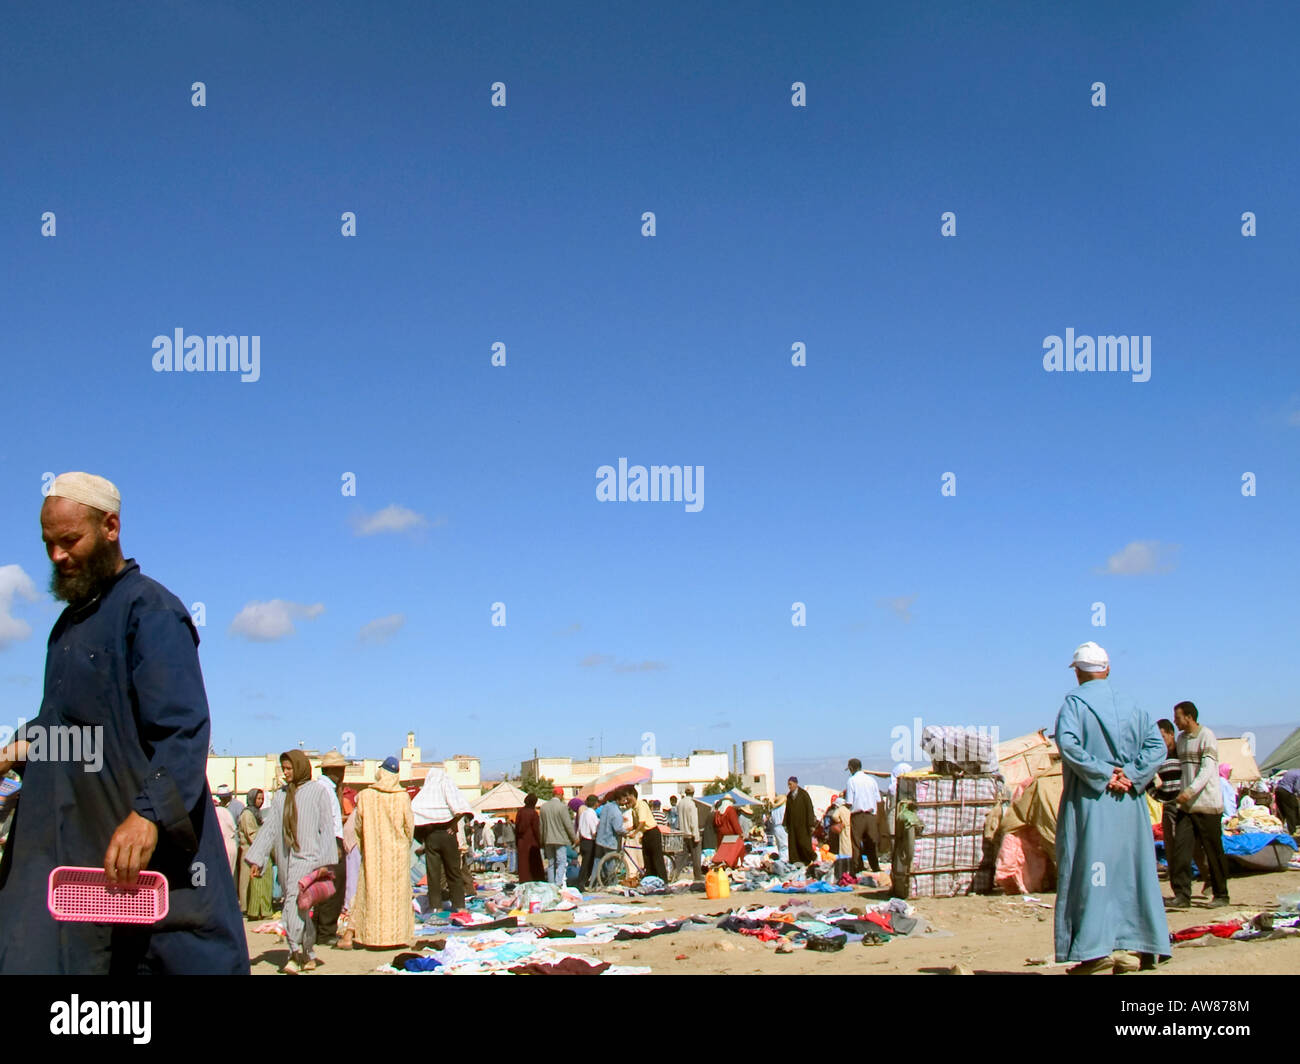 Street scene. Market in countryside Morocco. Local people buying and selling goods. North Africa. Stock Photo